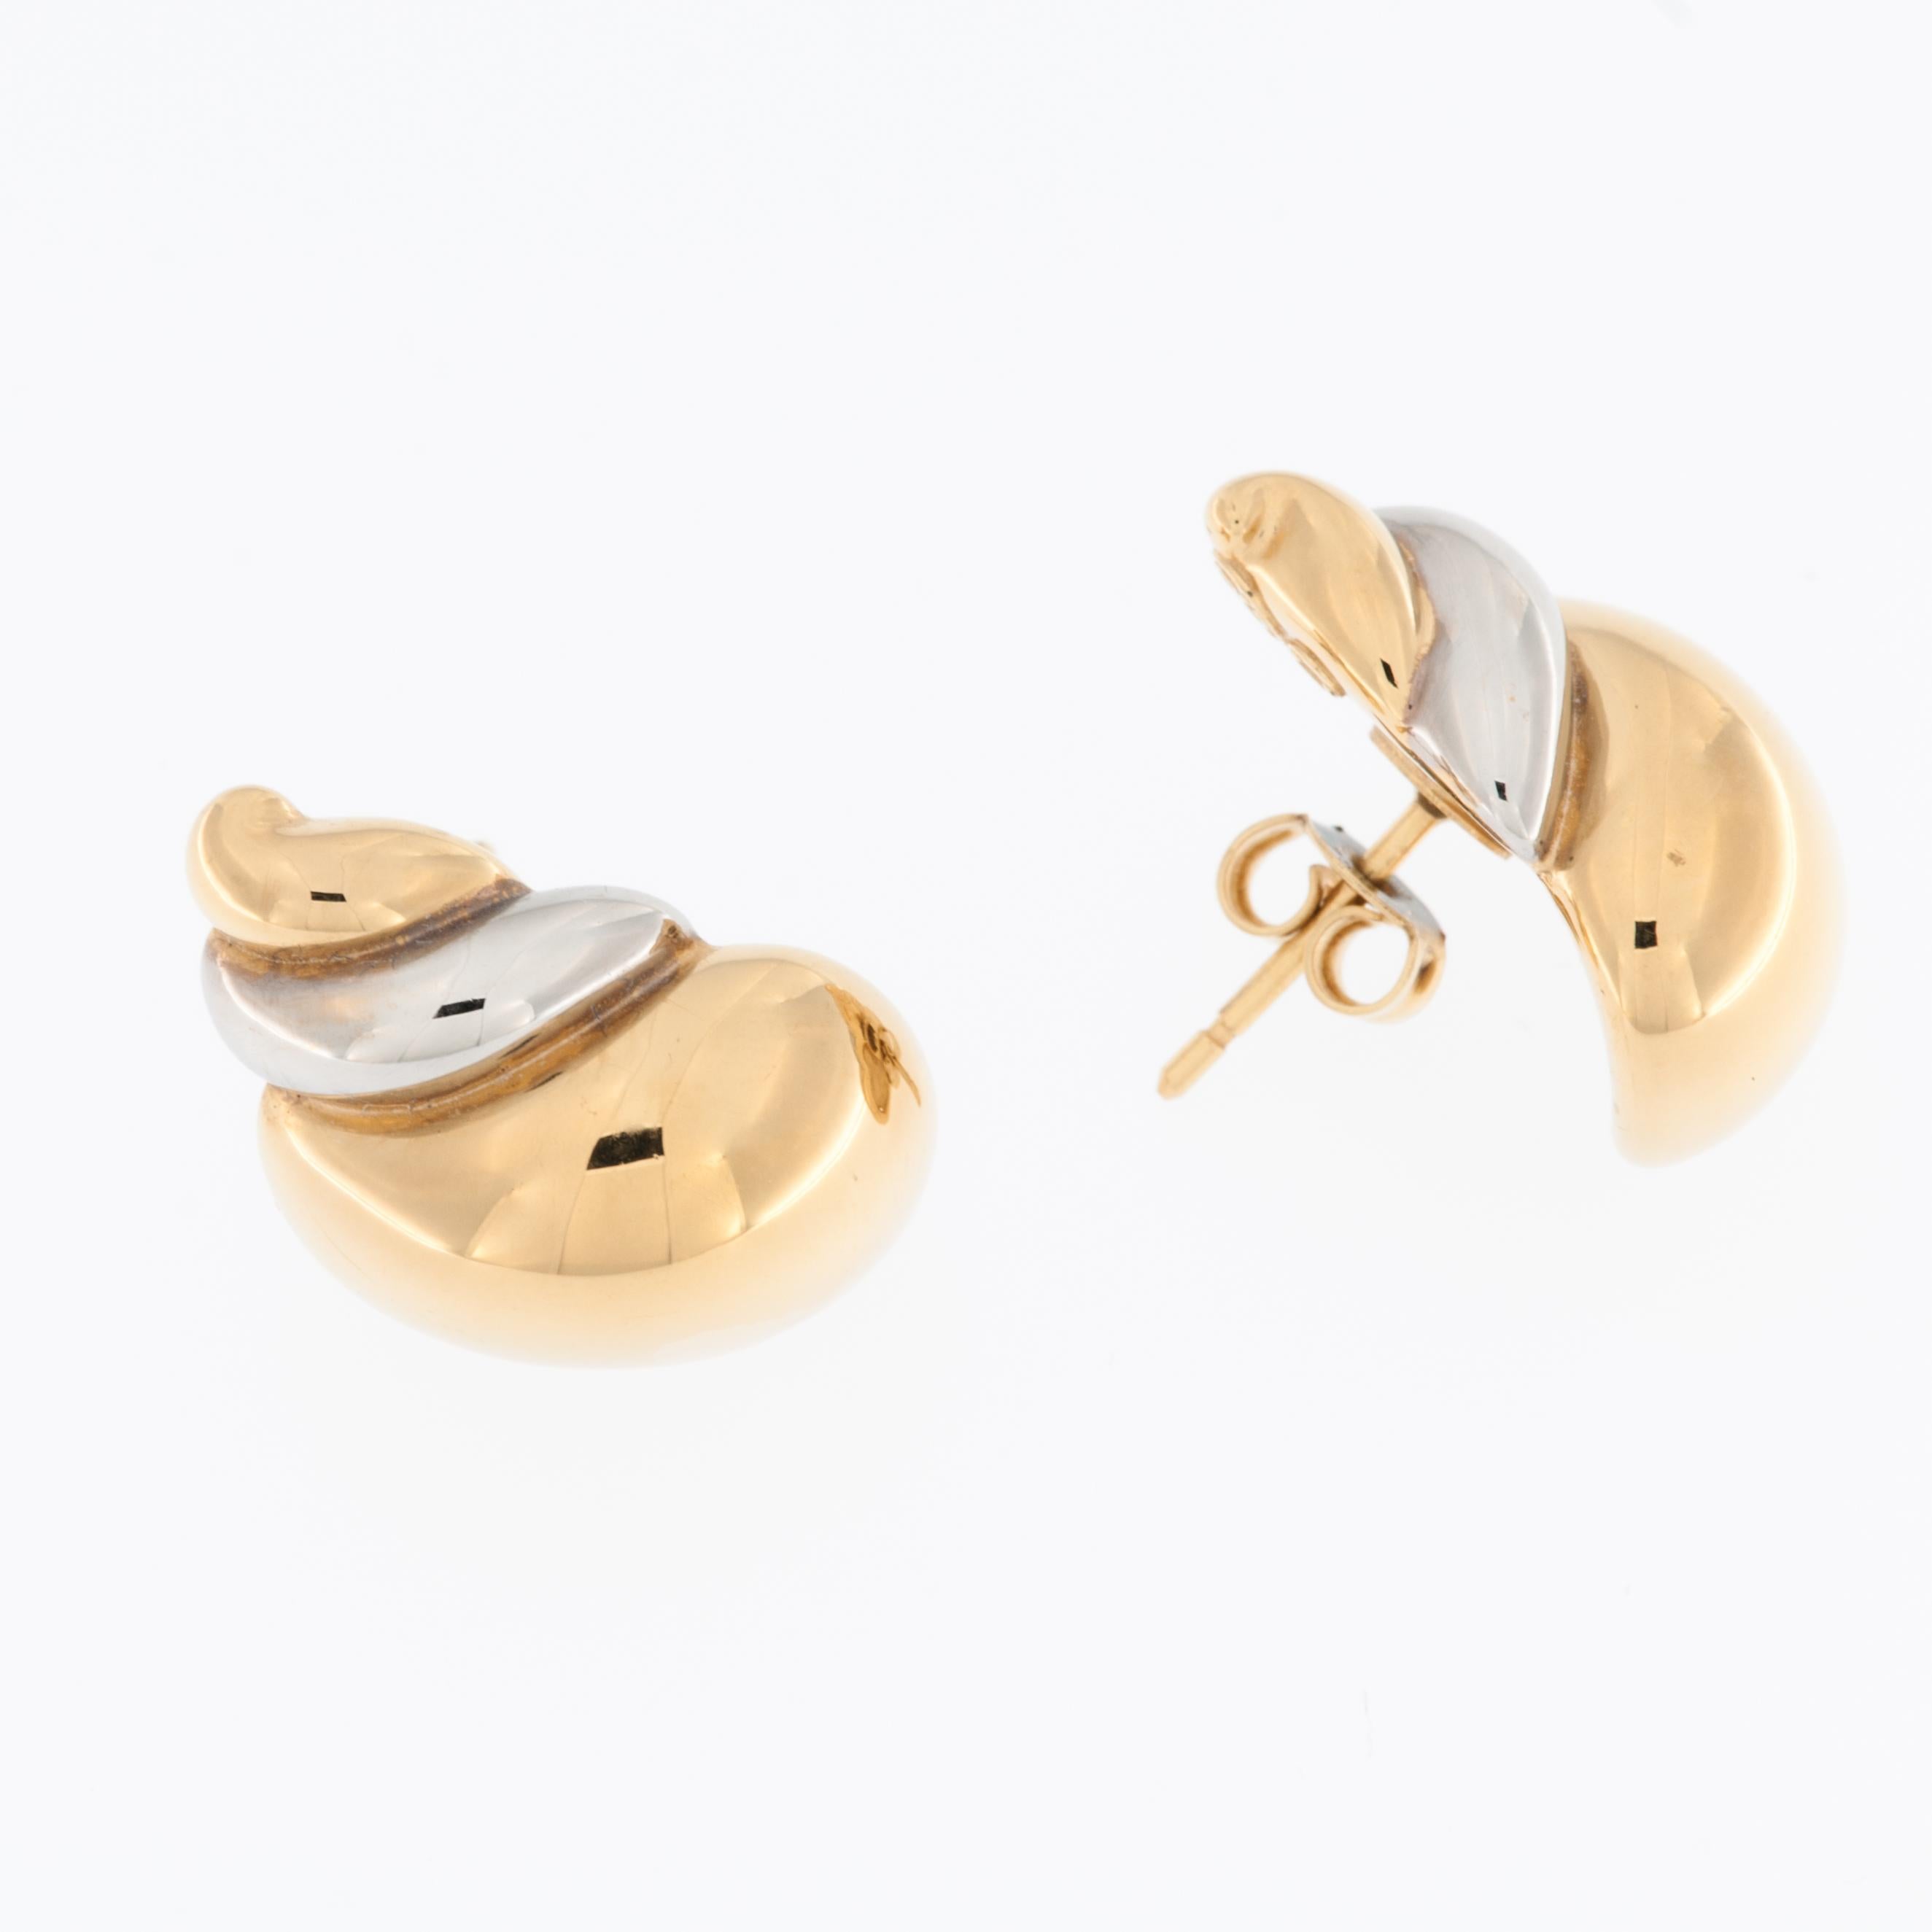 These Italian shell earrings are a unique and exquisite expression of craftsmanship and design. Crafted from a combination of 18kt yellow and white gold, these earrings showcase a blend of two luxurious metals, adding depth and contrast to the